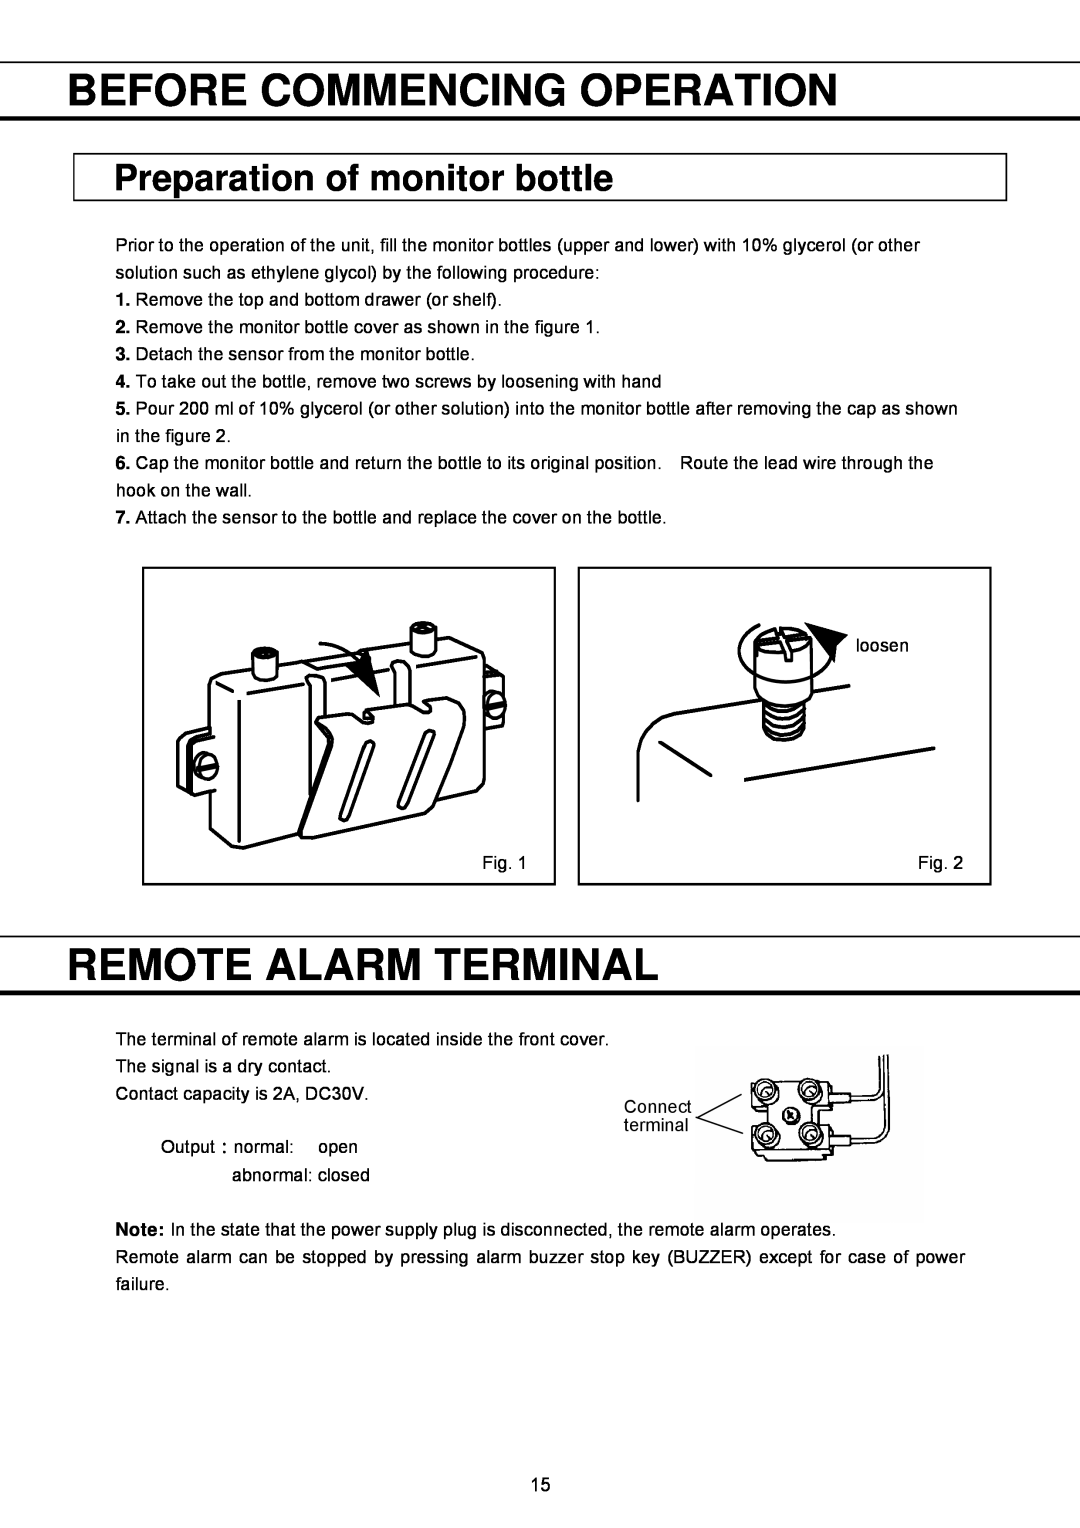 Sanyo MBR-1404GR instruction manual Before Commencing Operation, Remote Alarm Terminal, Preparation of monitor bottle 